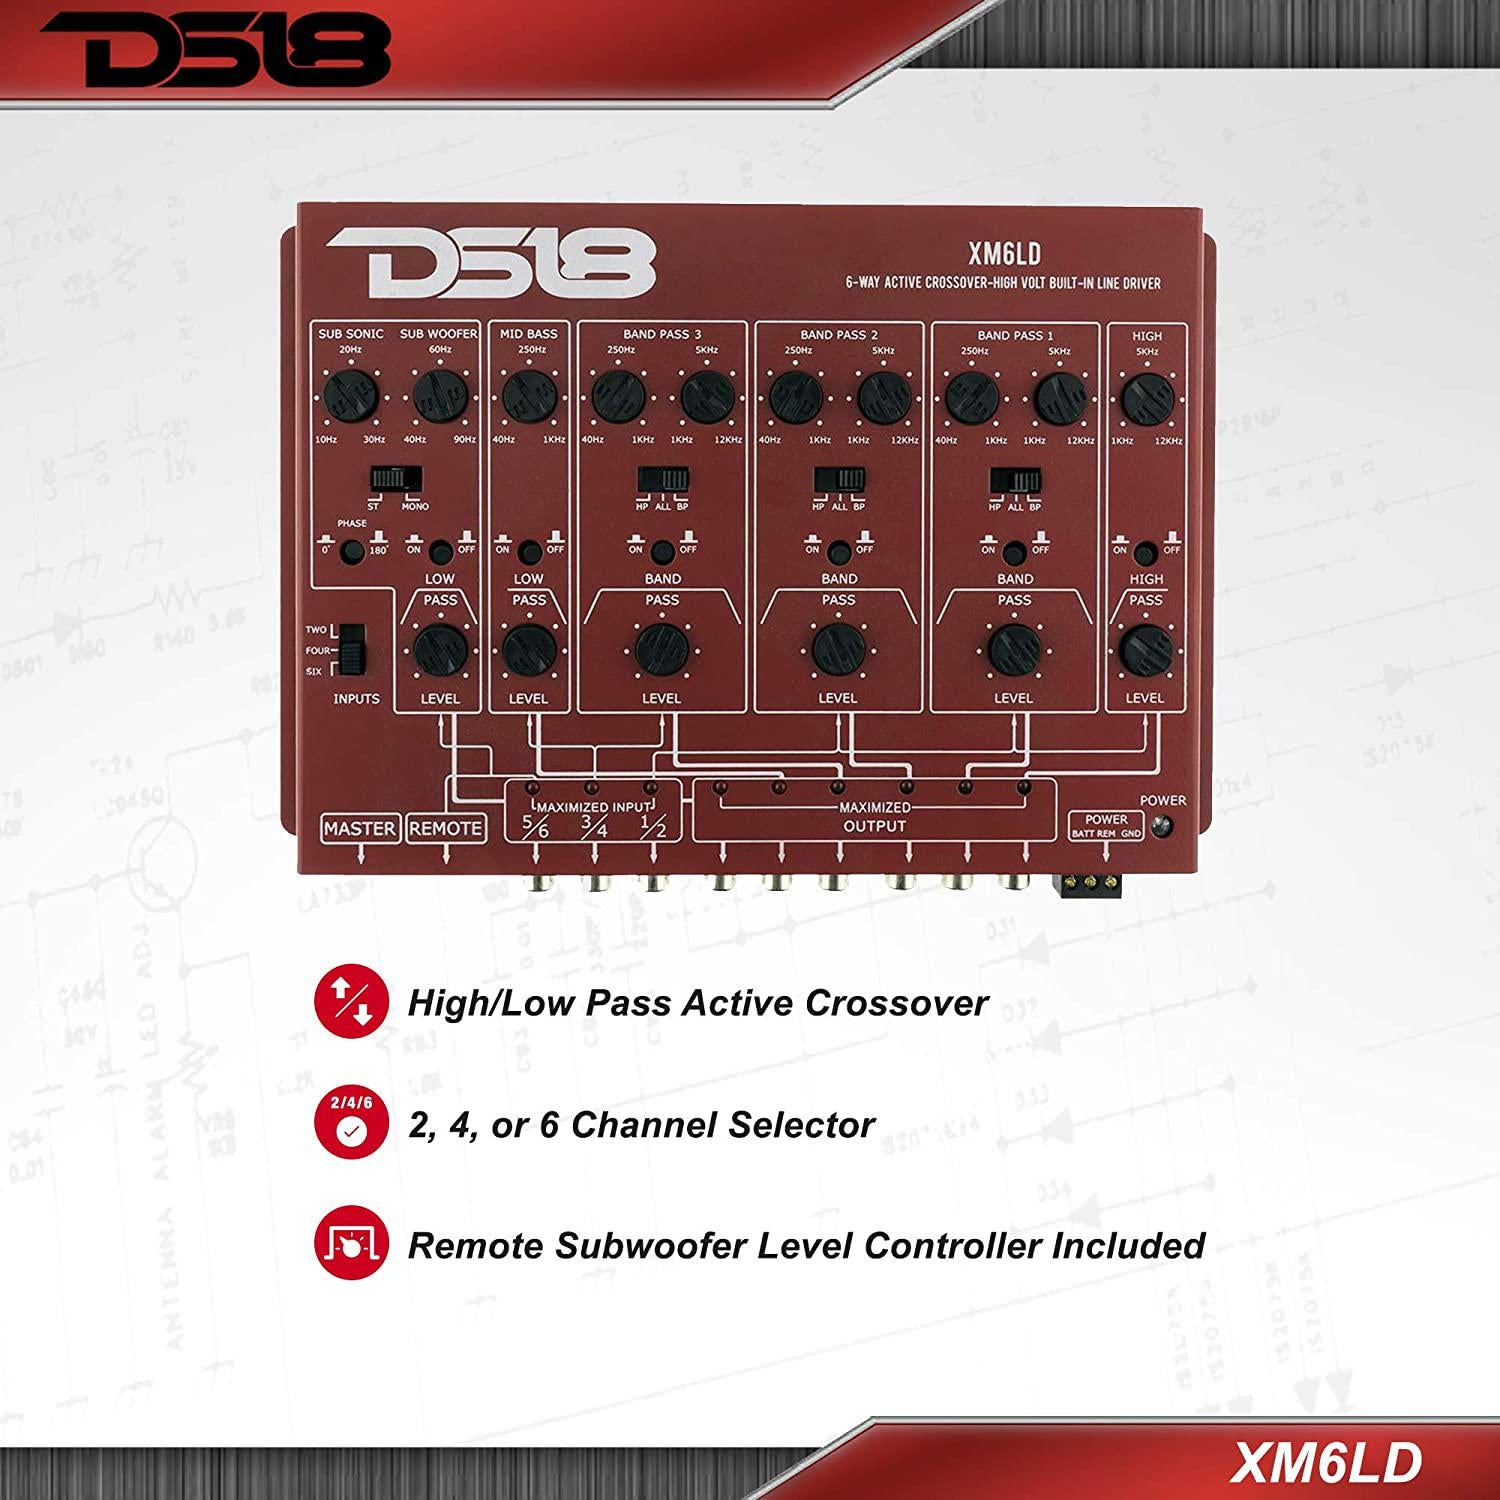 DS18, DS18 XM6LD 6-Way Active Crossover - High/Low Pass, 2, 4, or 6 Channel Selector, with Remote Subwoofer Control - Perfect Frequency Distribution System Ensures Clarity and Peak Efficiency